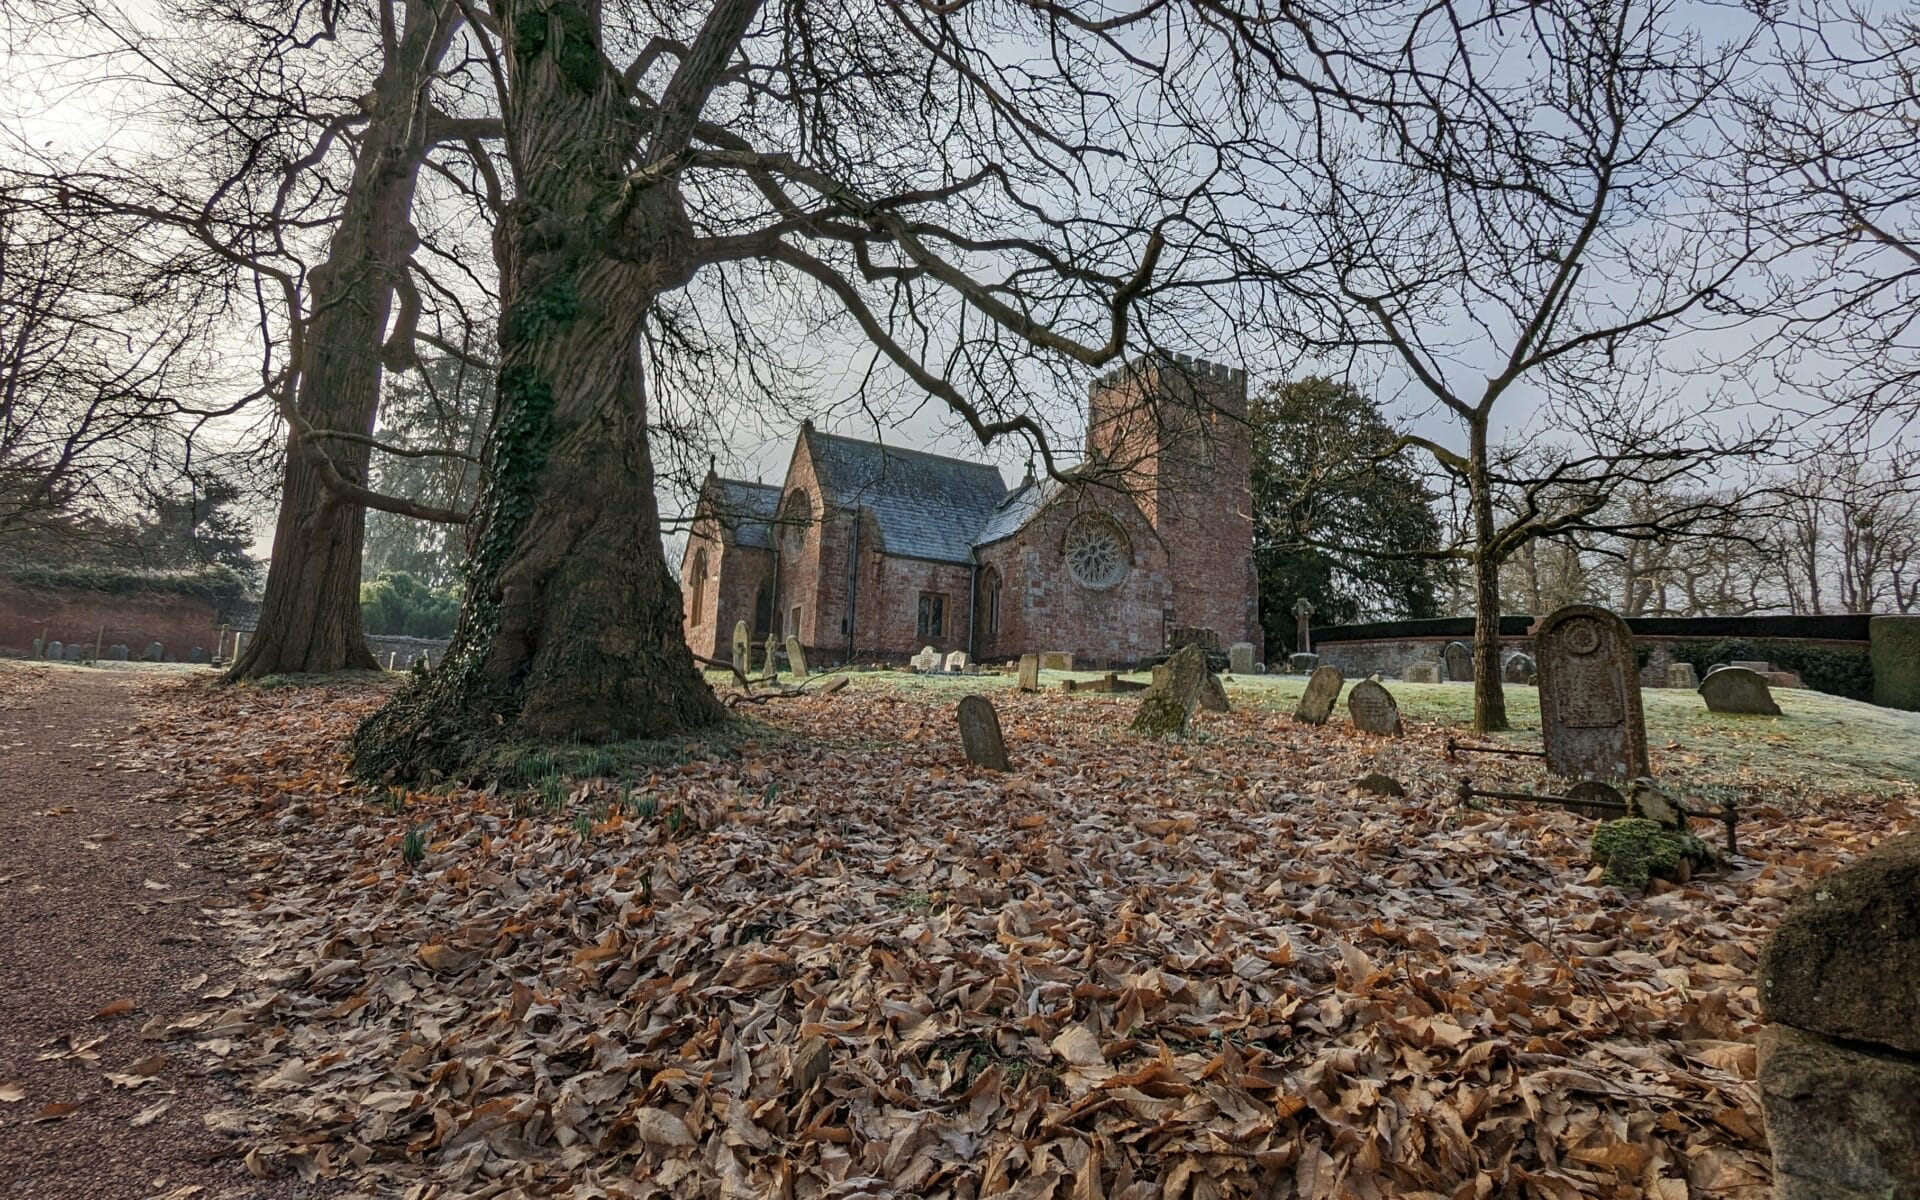 A beautiful red brick church sits in a churchyard full of fallen leaves. A bare tree fills the front of the frame. The light is wintery and grey.